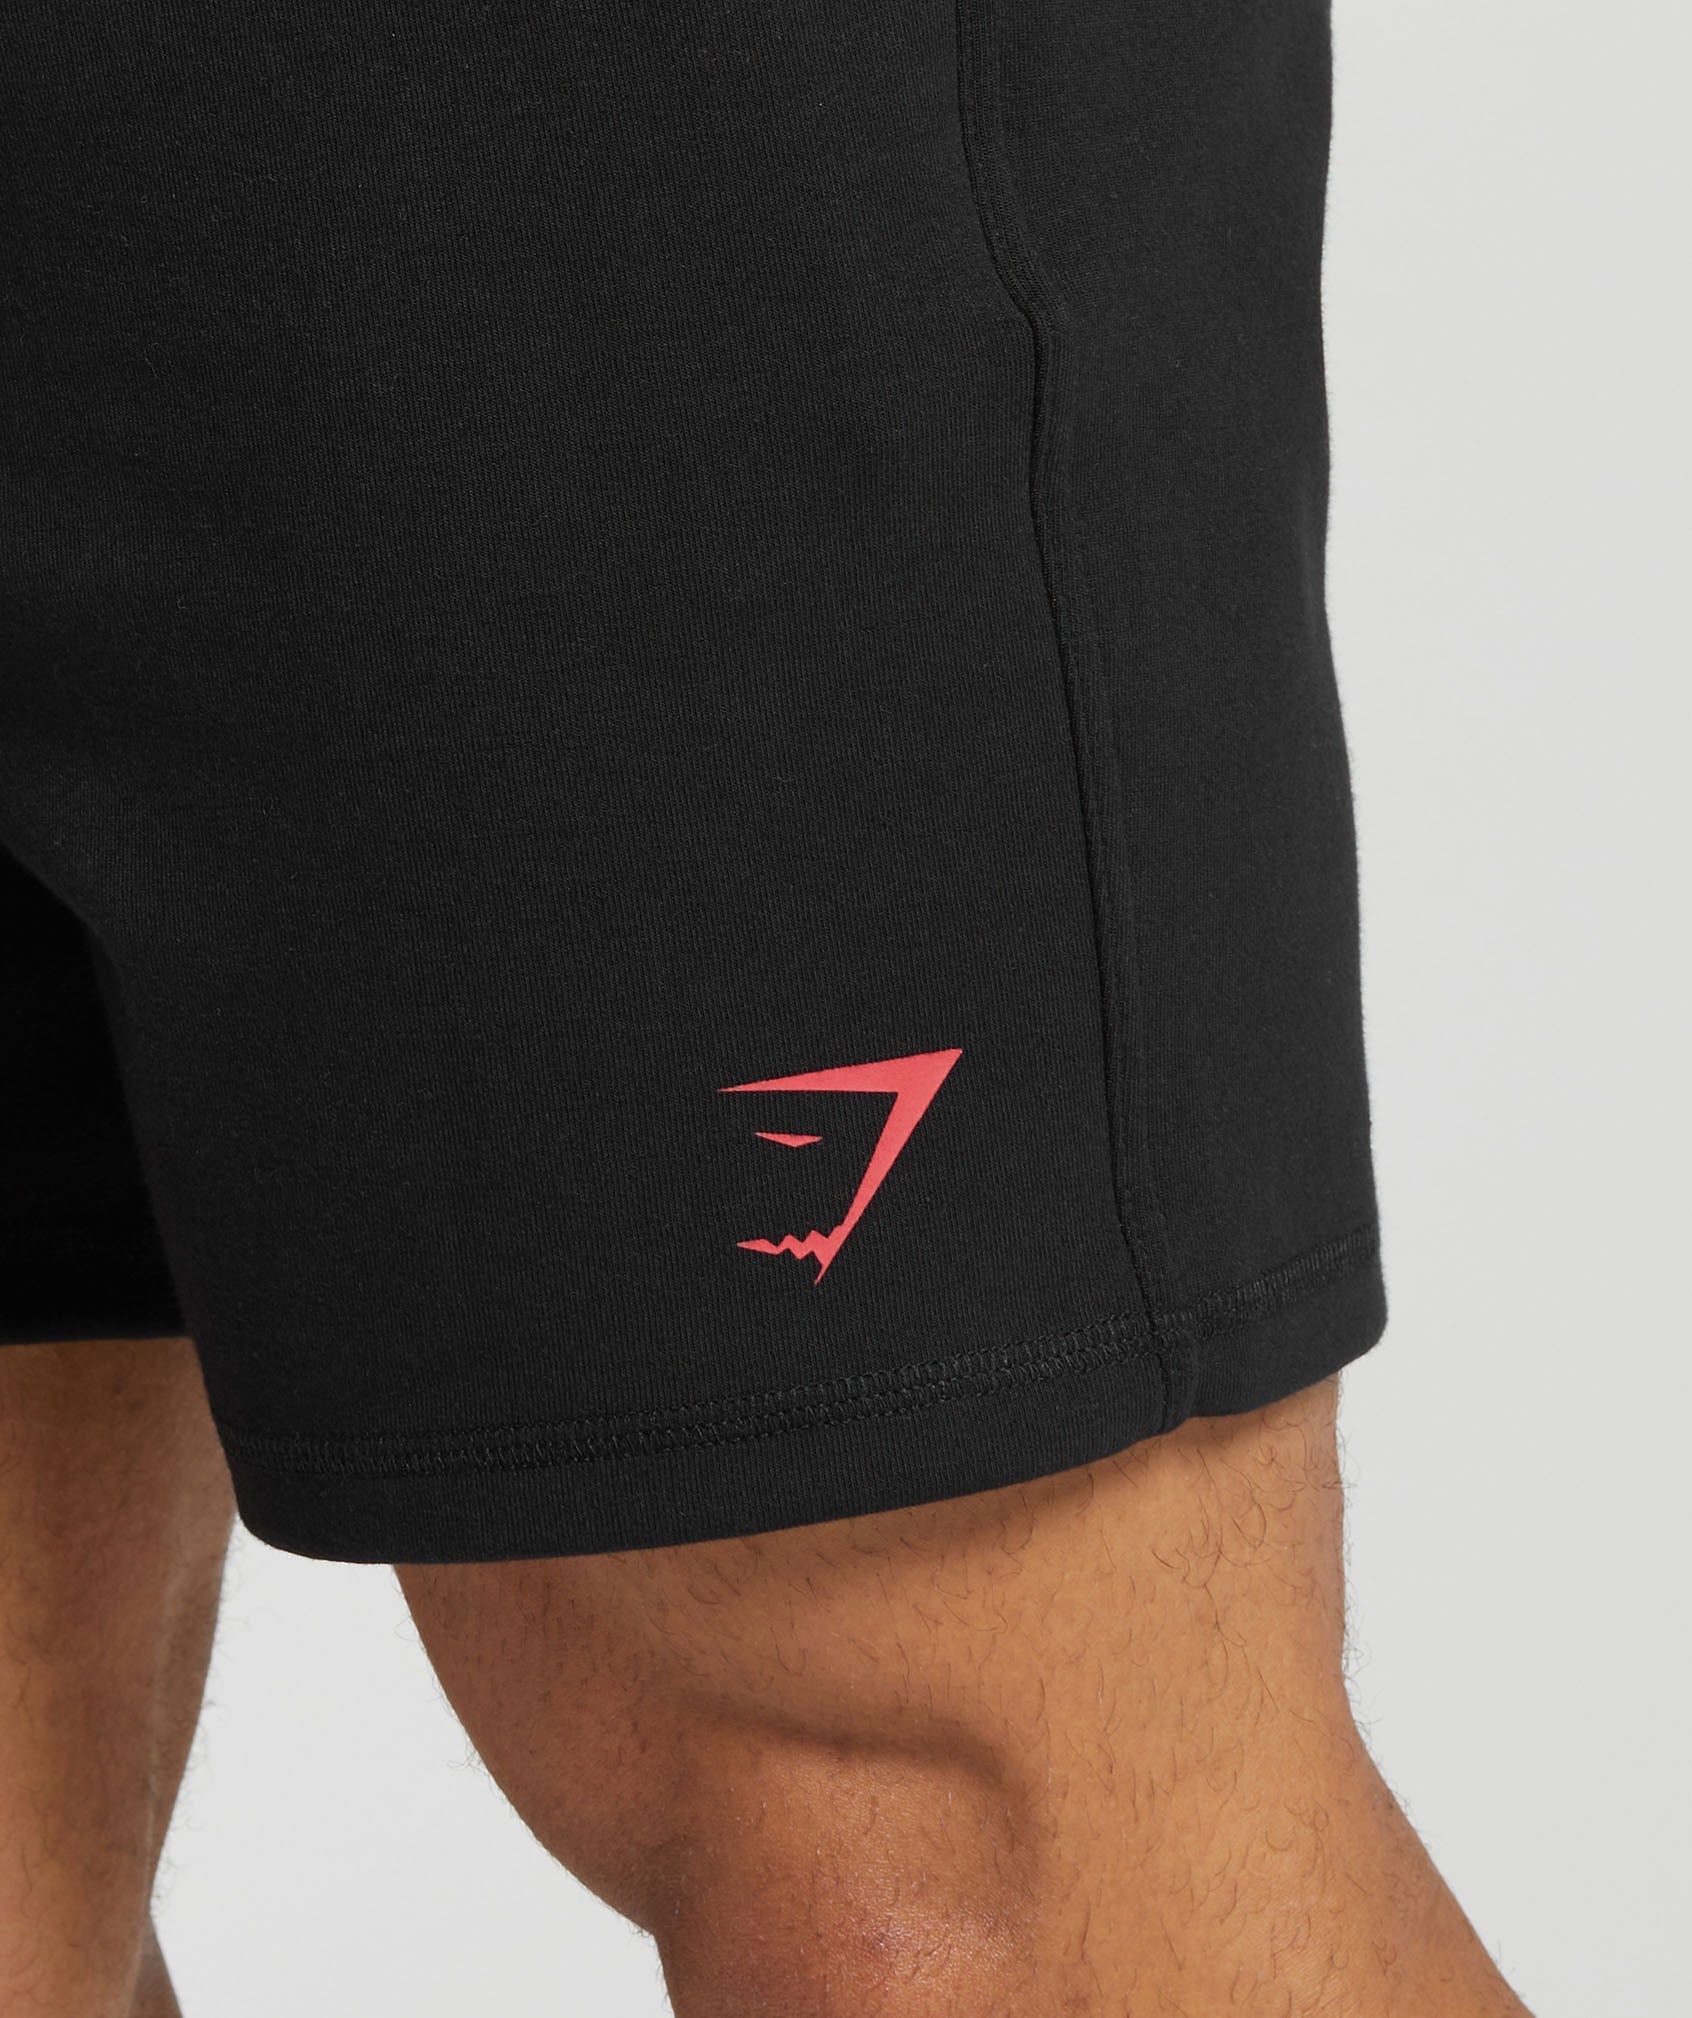 Impact Shorts in Black/Vivid Red - view 5